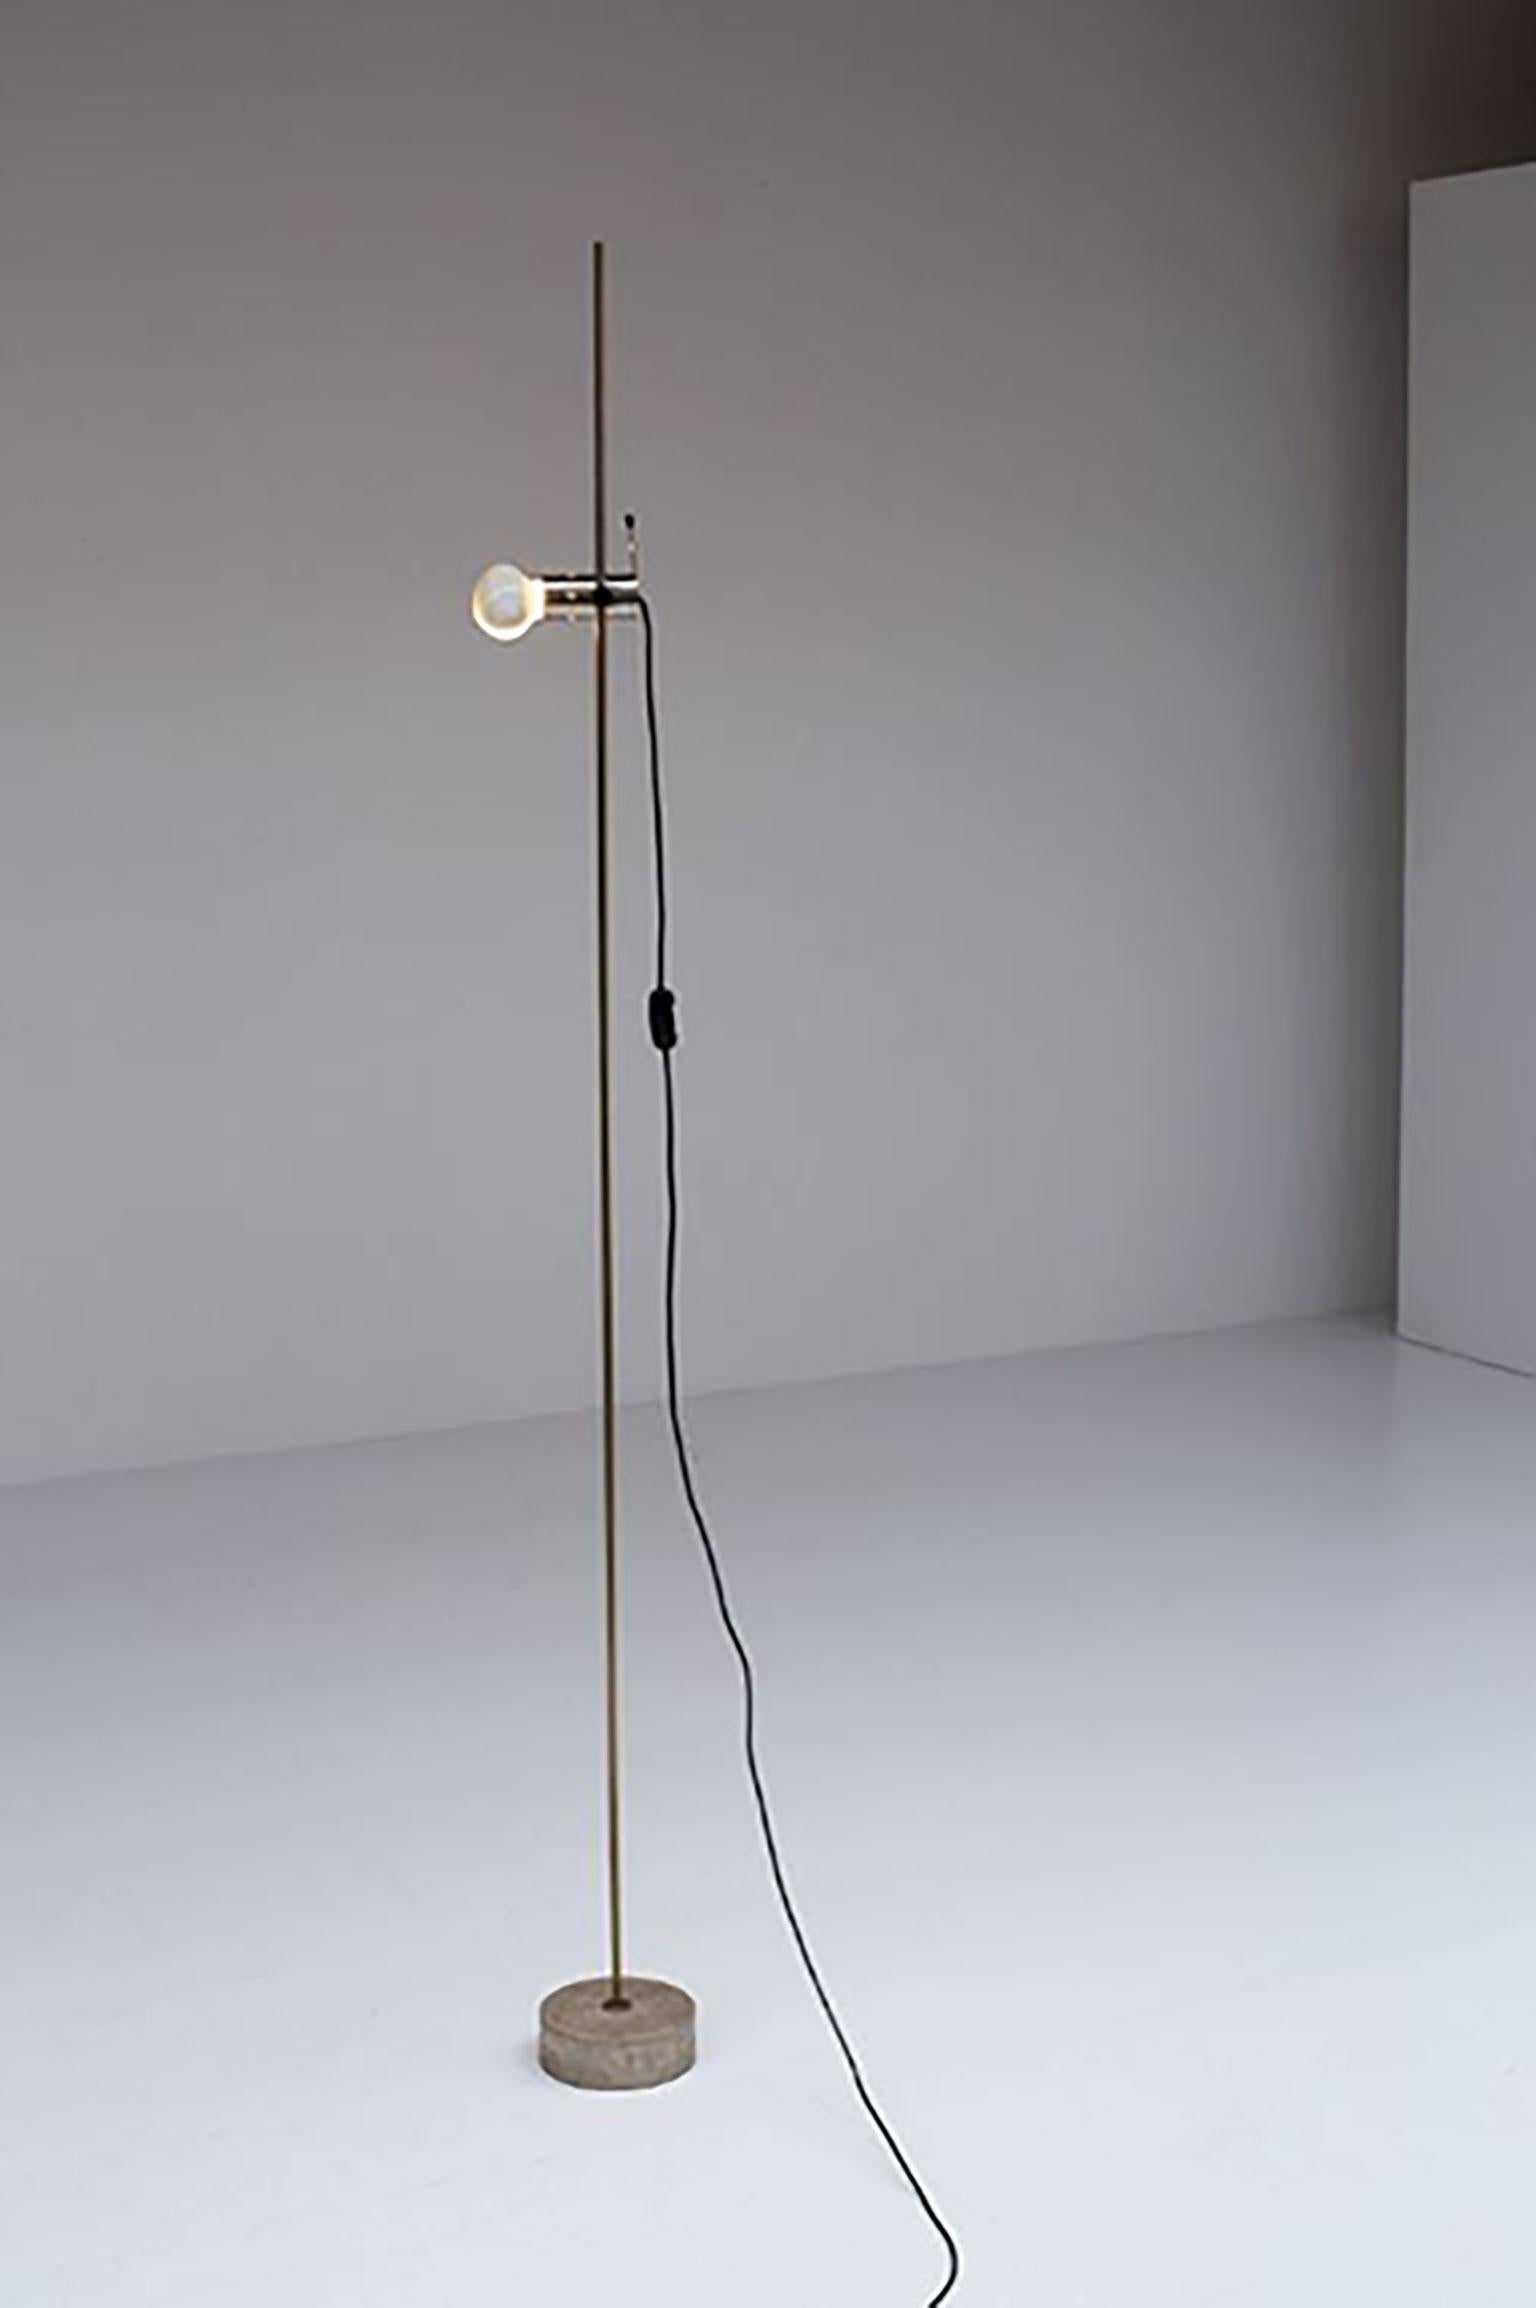 Agnoli floor lamp by Tito Agnoli for Oluce. The lamp gets its name from the designer who was nominated twice for the Compasso d’Oro award and was awarded the gold medal at Neocon in Chicago. A superb example of minimalistic design, this model of